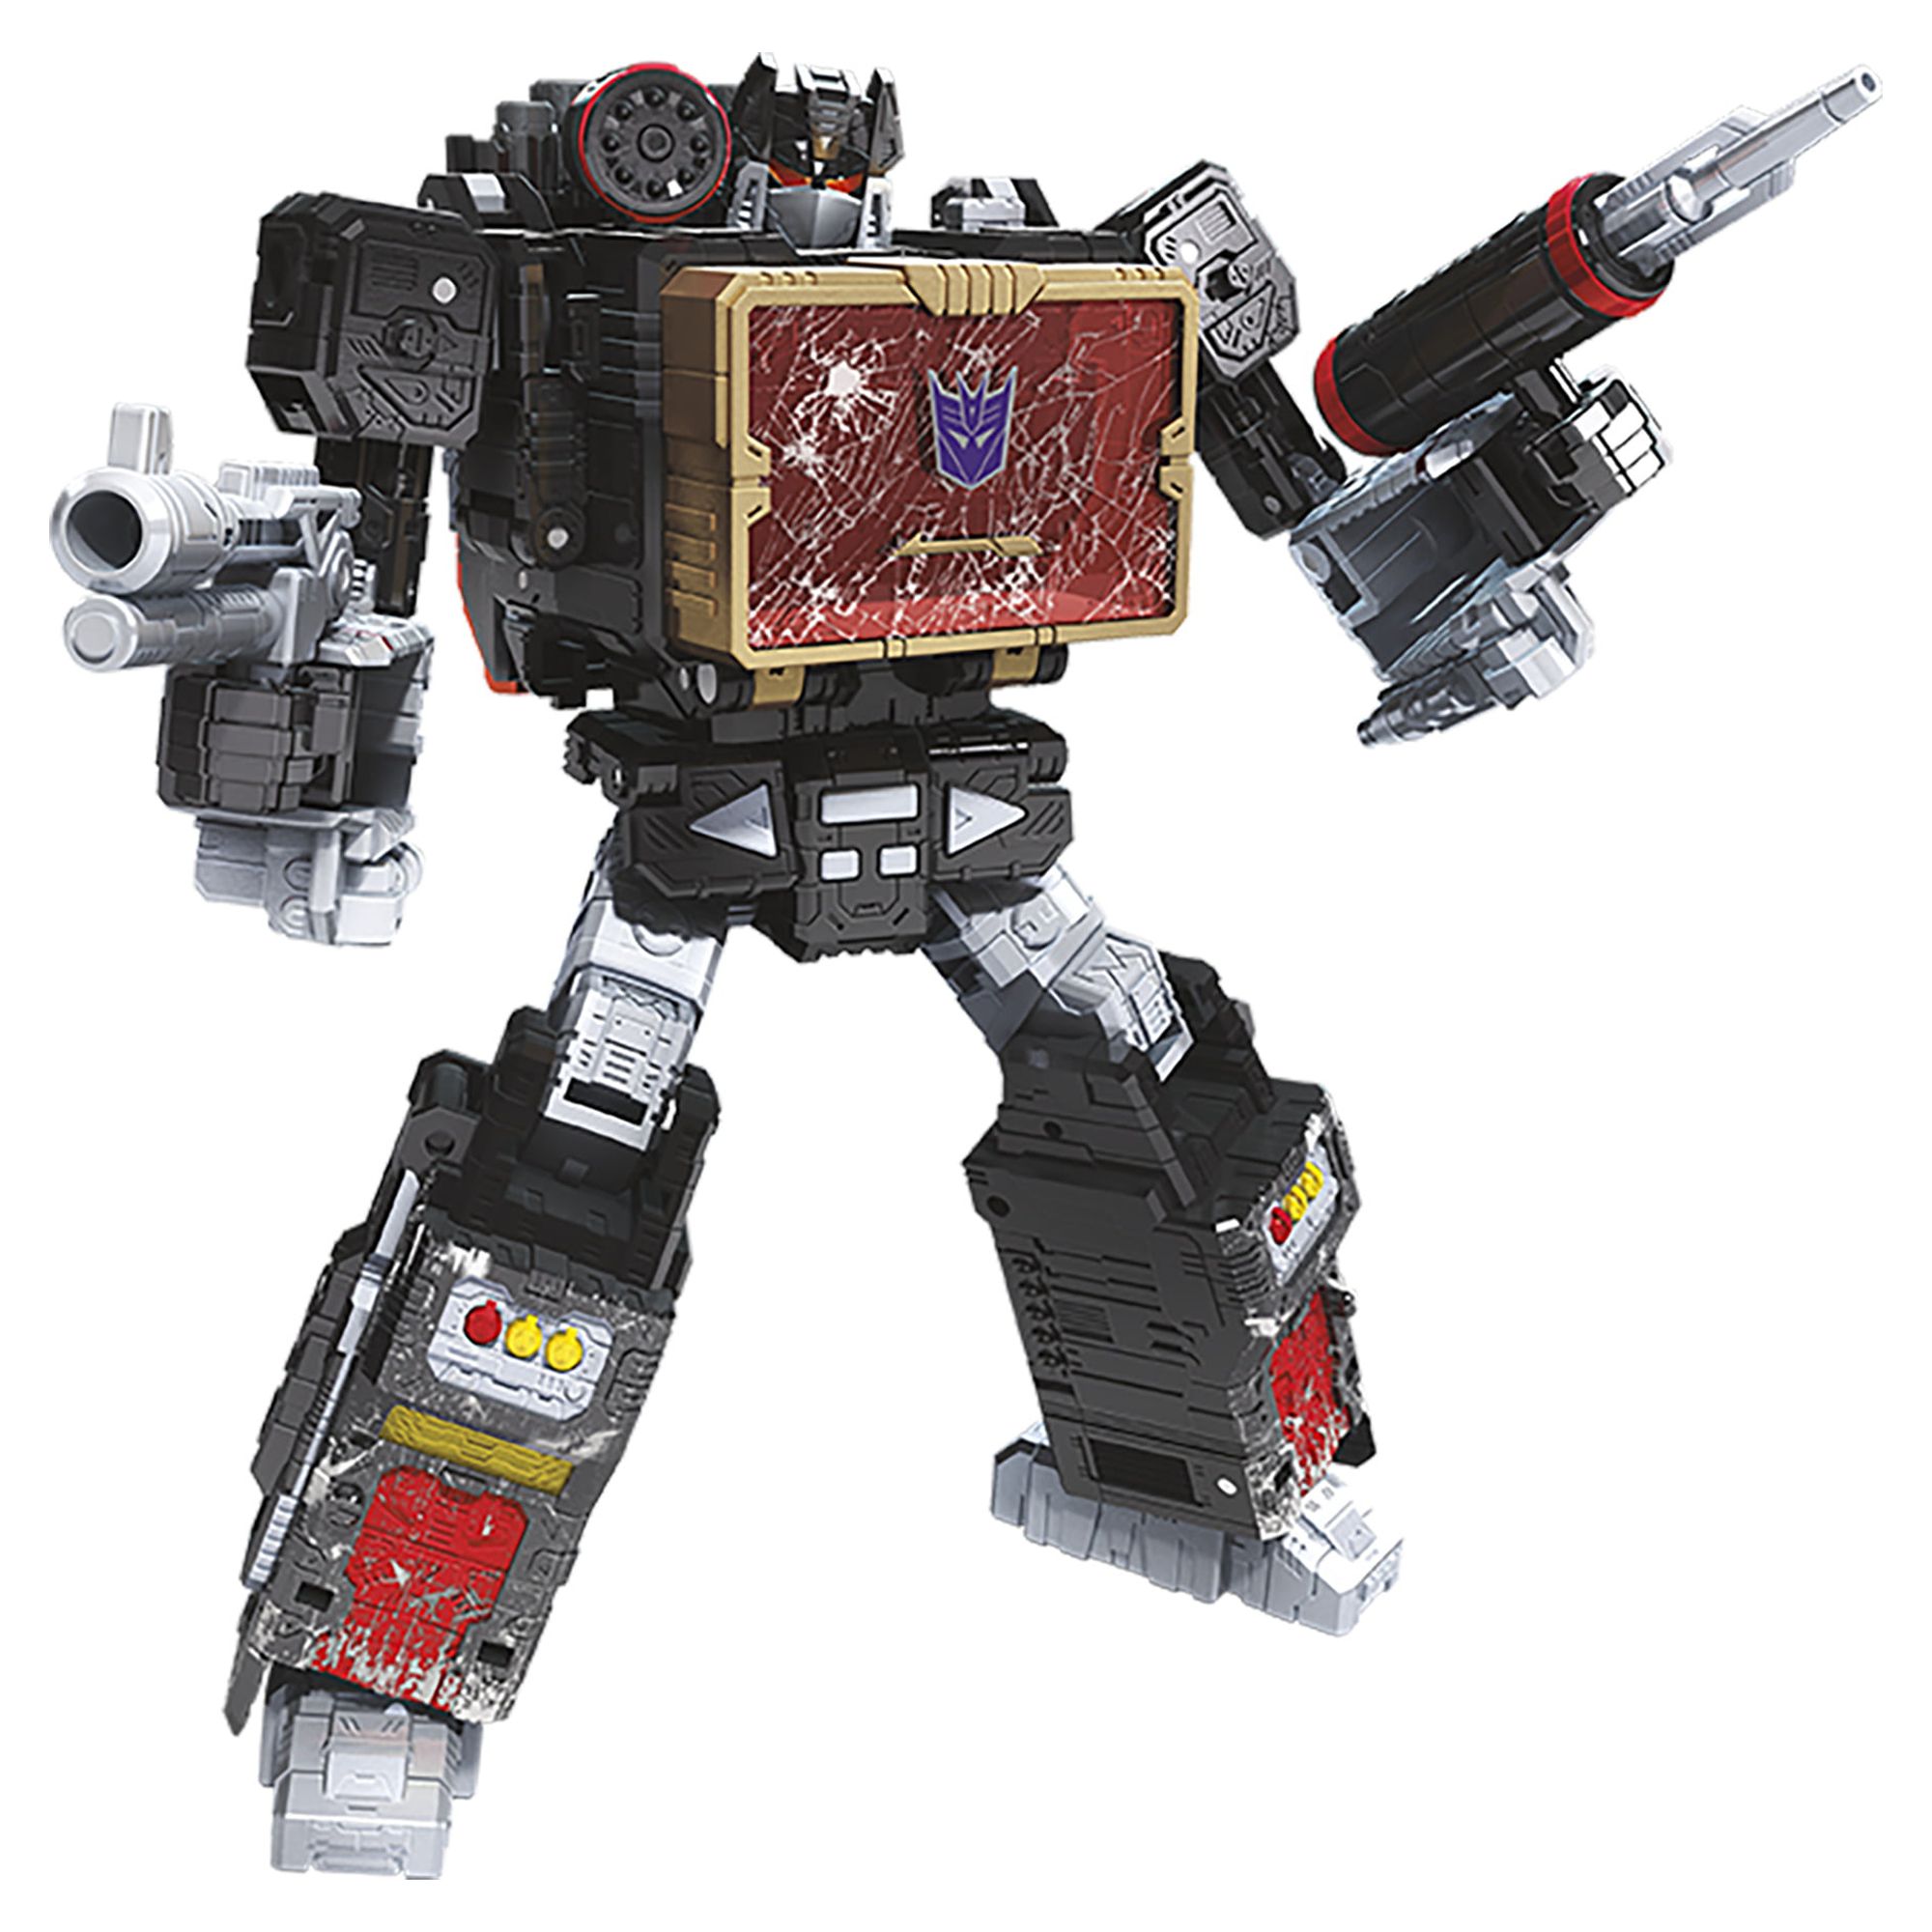 Transformers War for Cybertron Voyager 35th Anniversary WFC-S55 Soundblaster - image 3 of 6